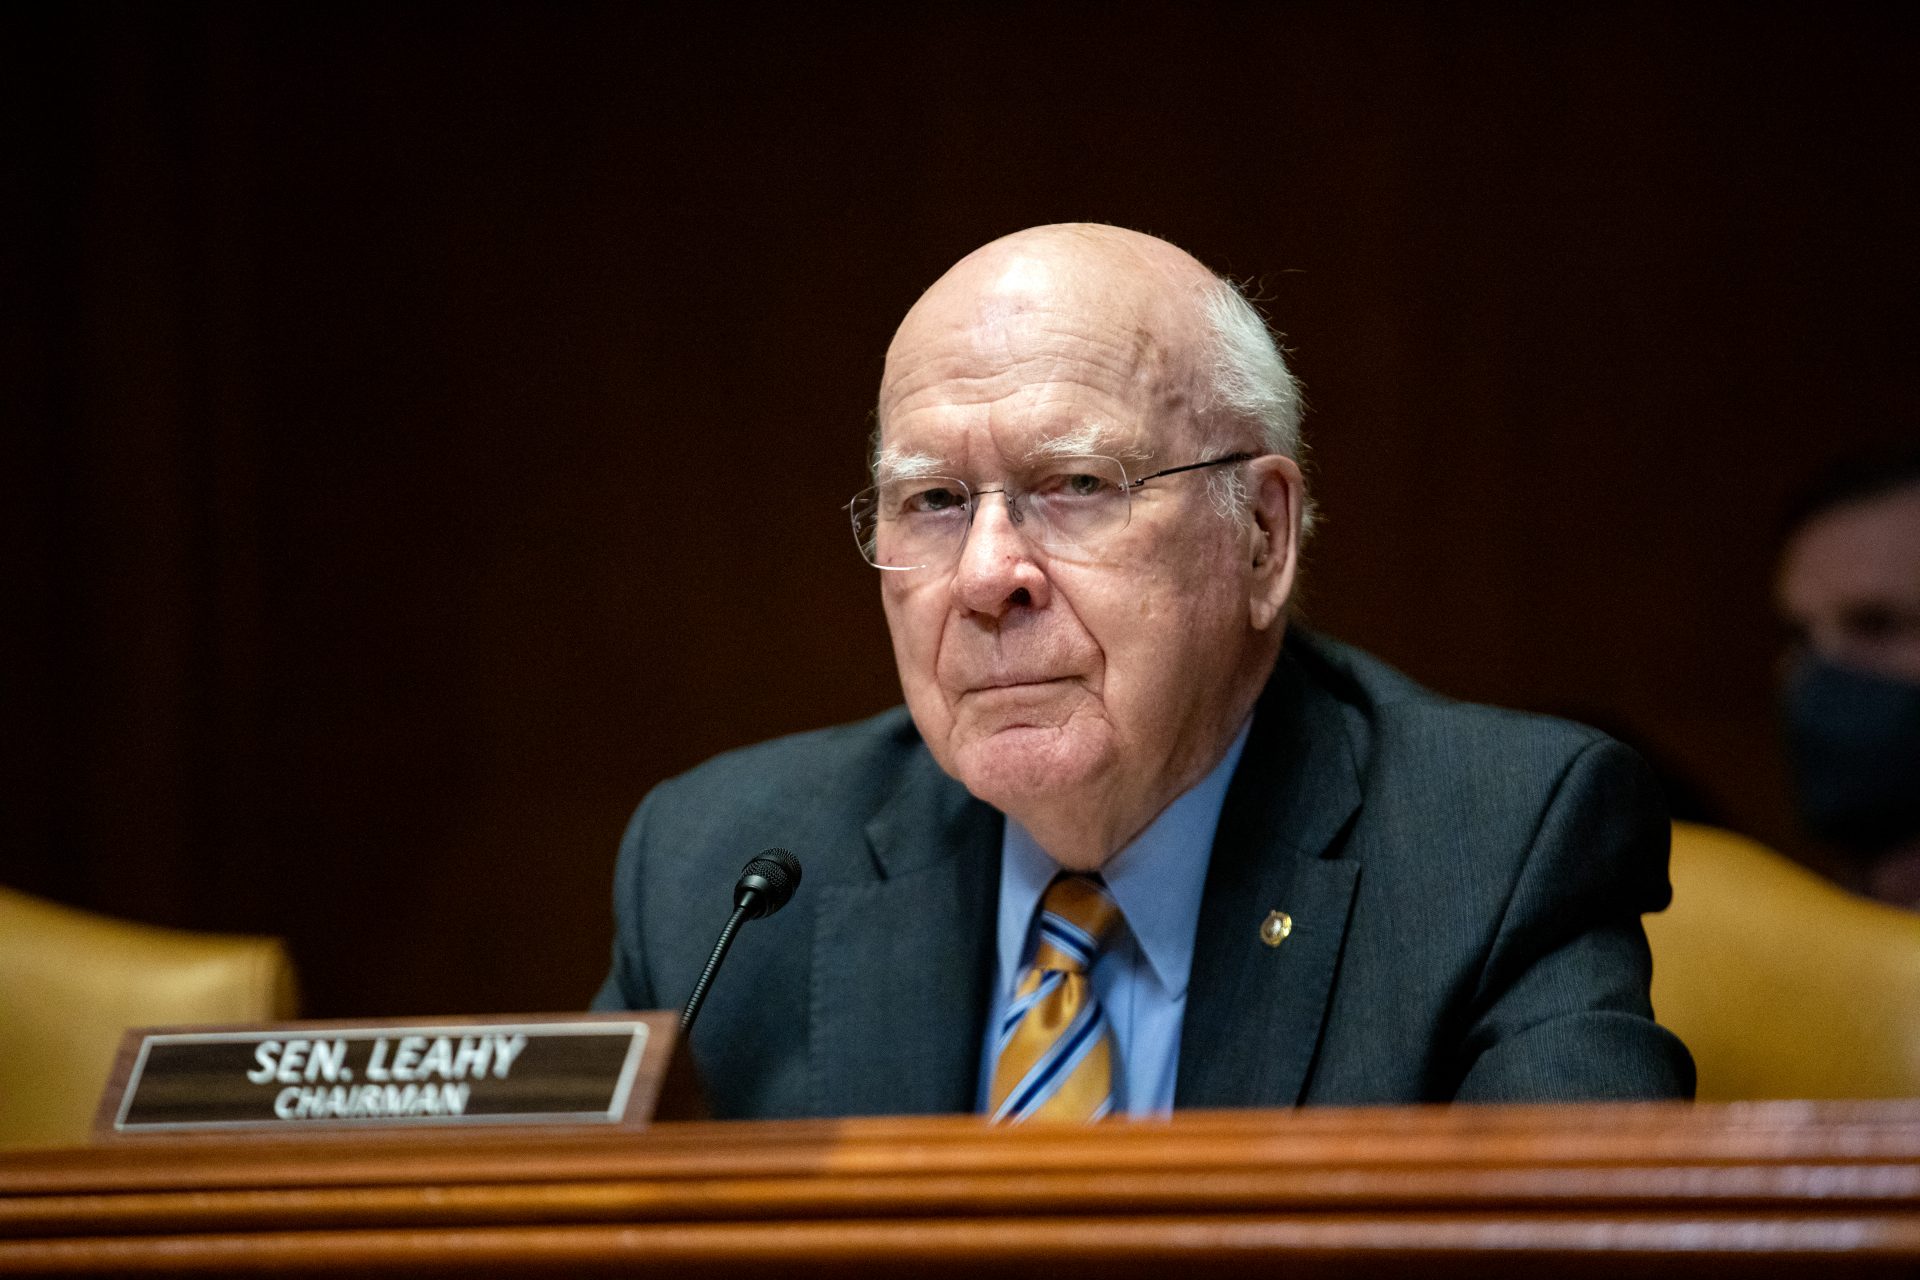 The Leahy Law